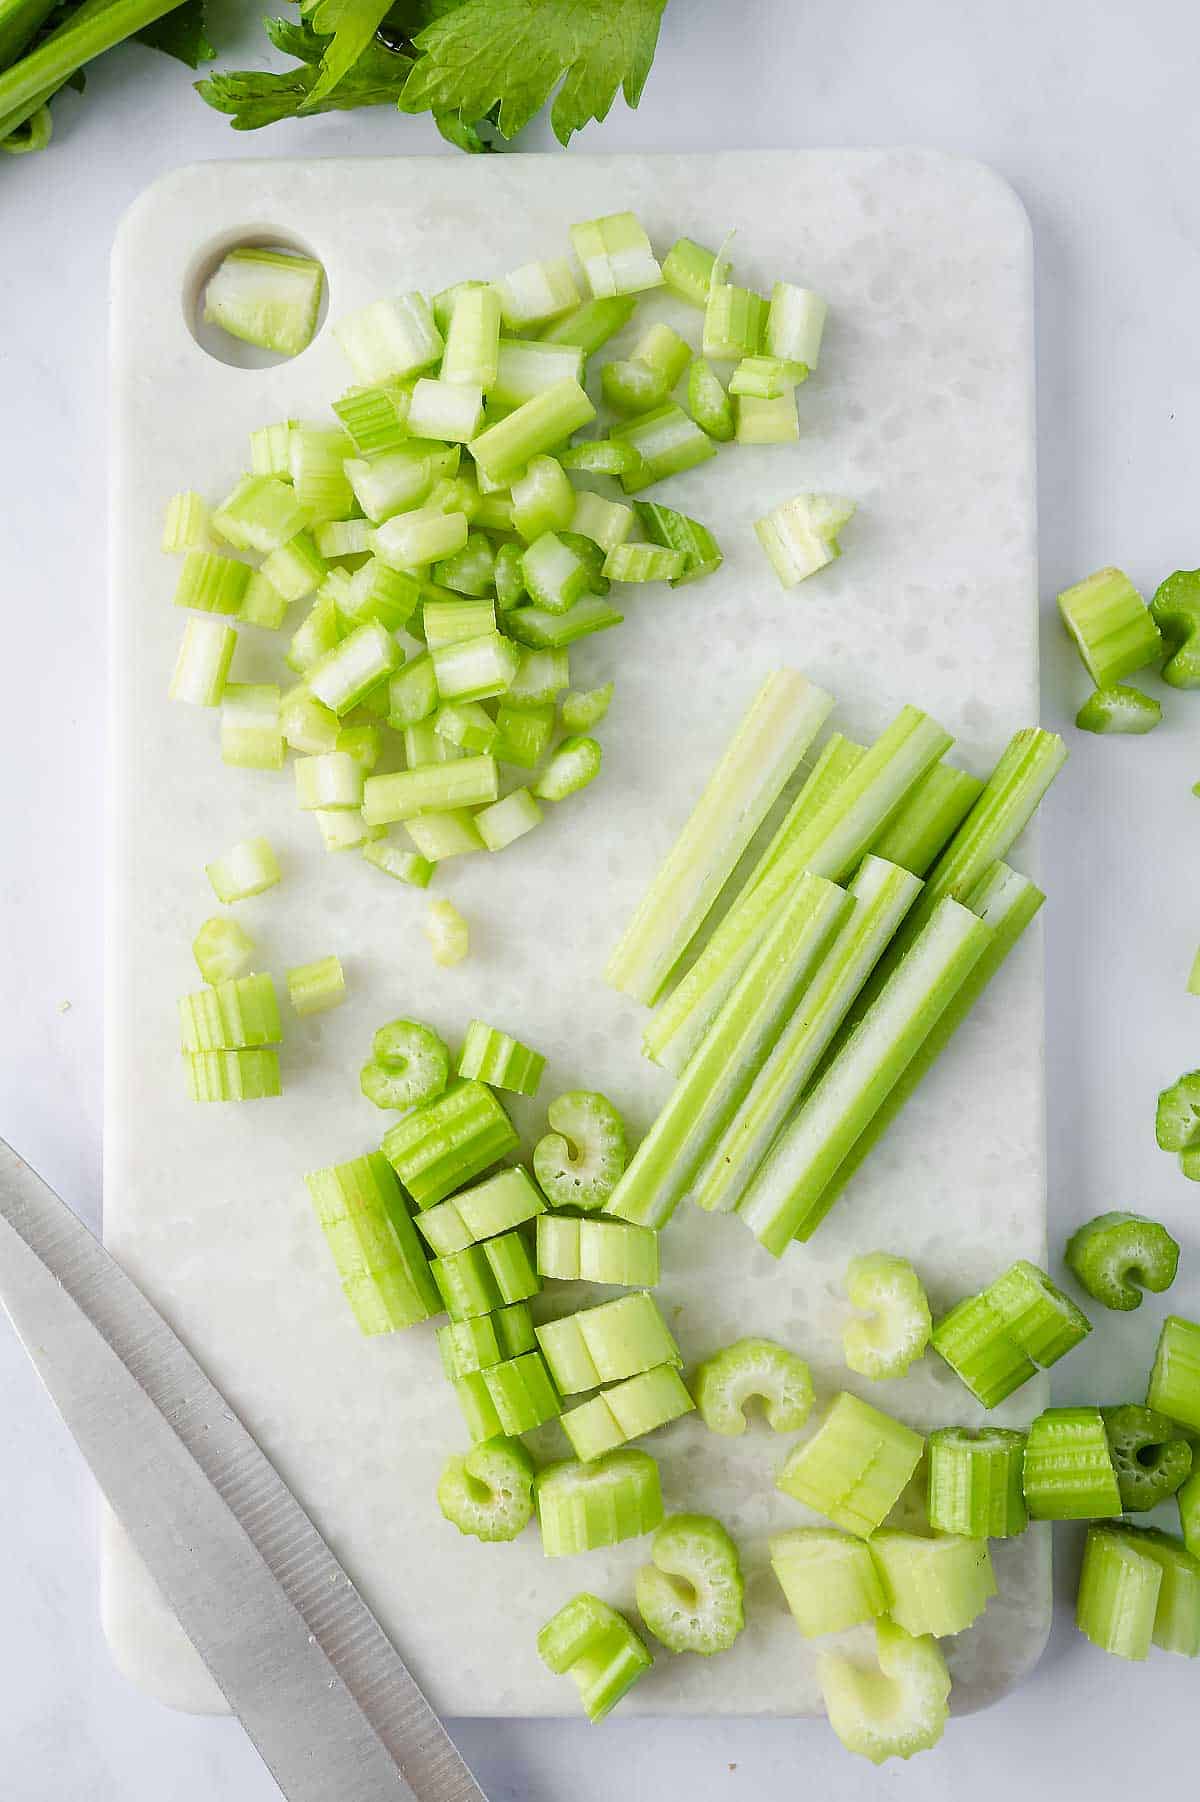 Celery on cutting board being cut into sticks, slices and fine dice